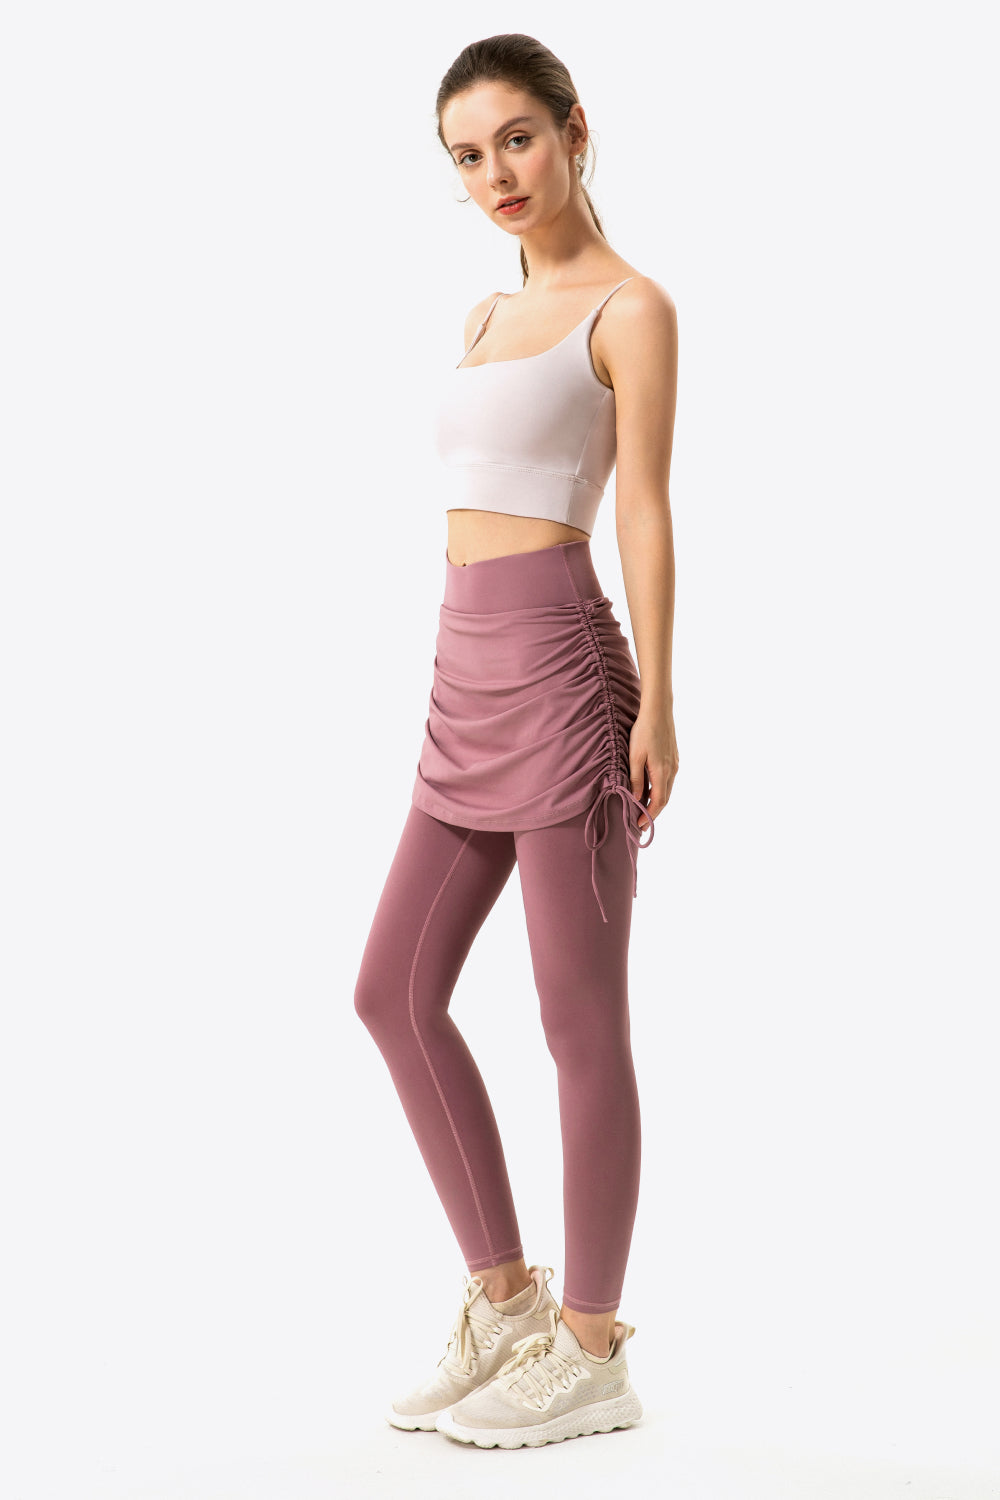 Drawstring Ruched Faux Layered Yoga Leggings (7 Colors)